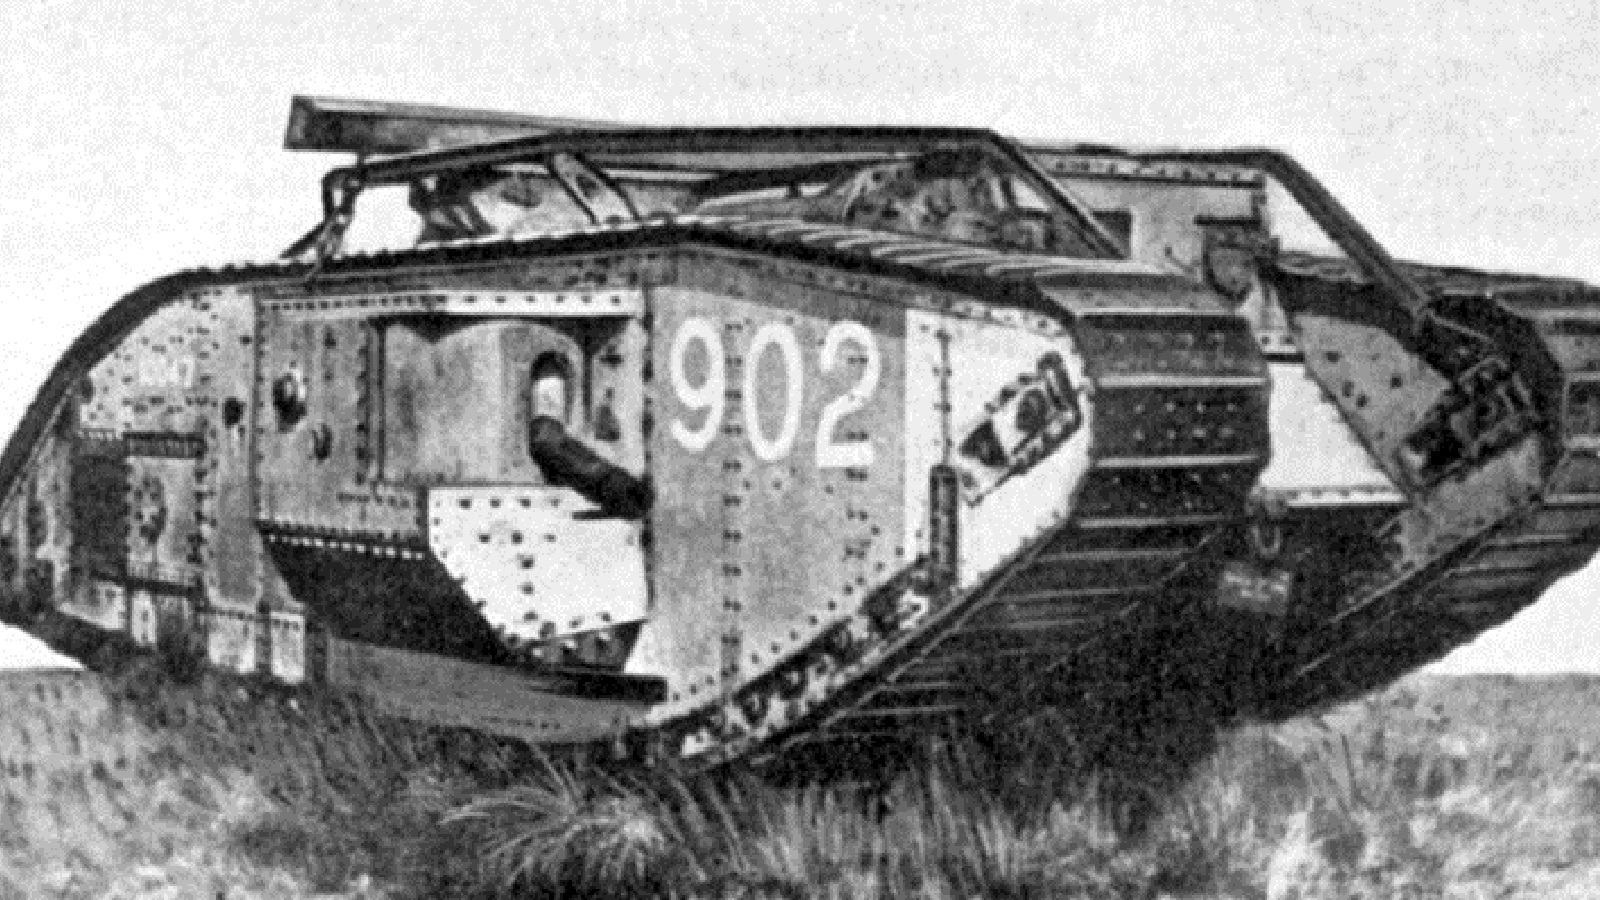 World of Tanks - In May 1945, the first Black Prince prototypes